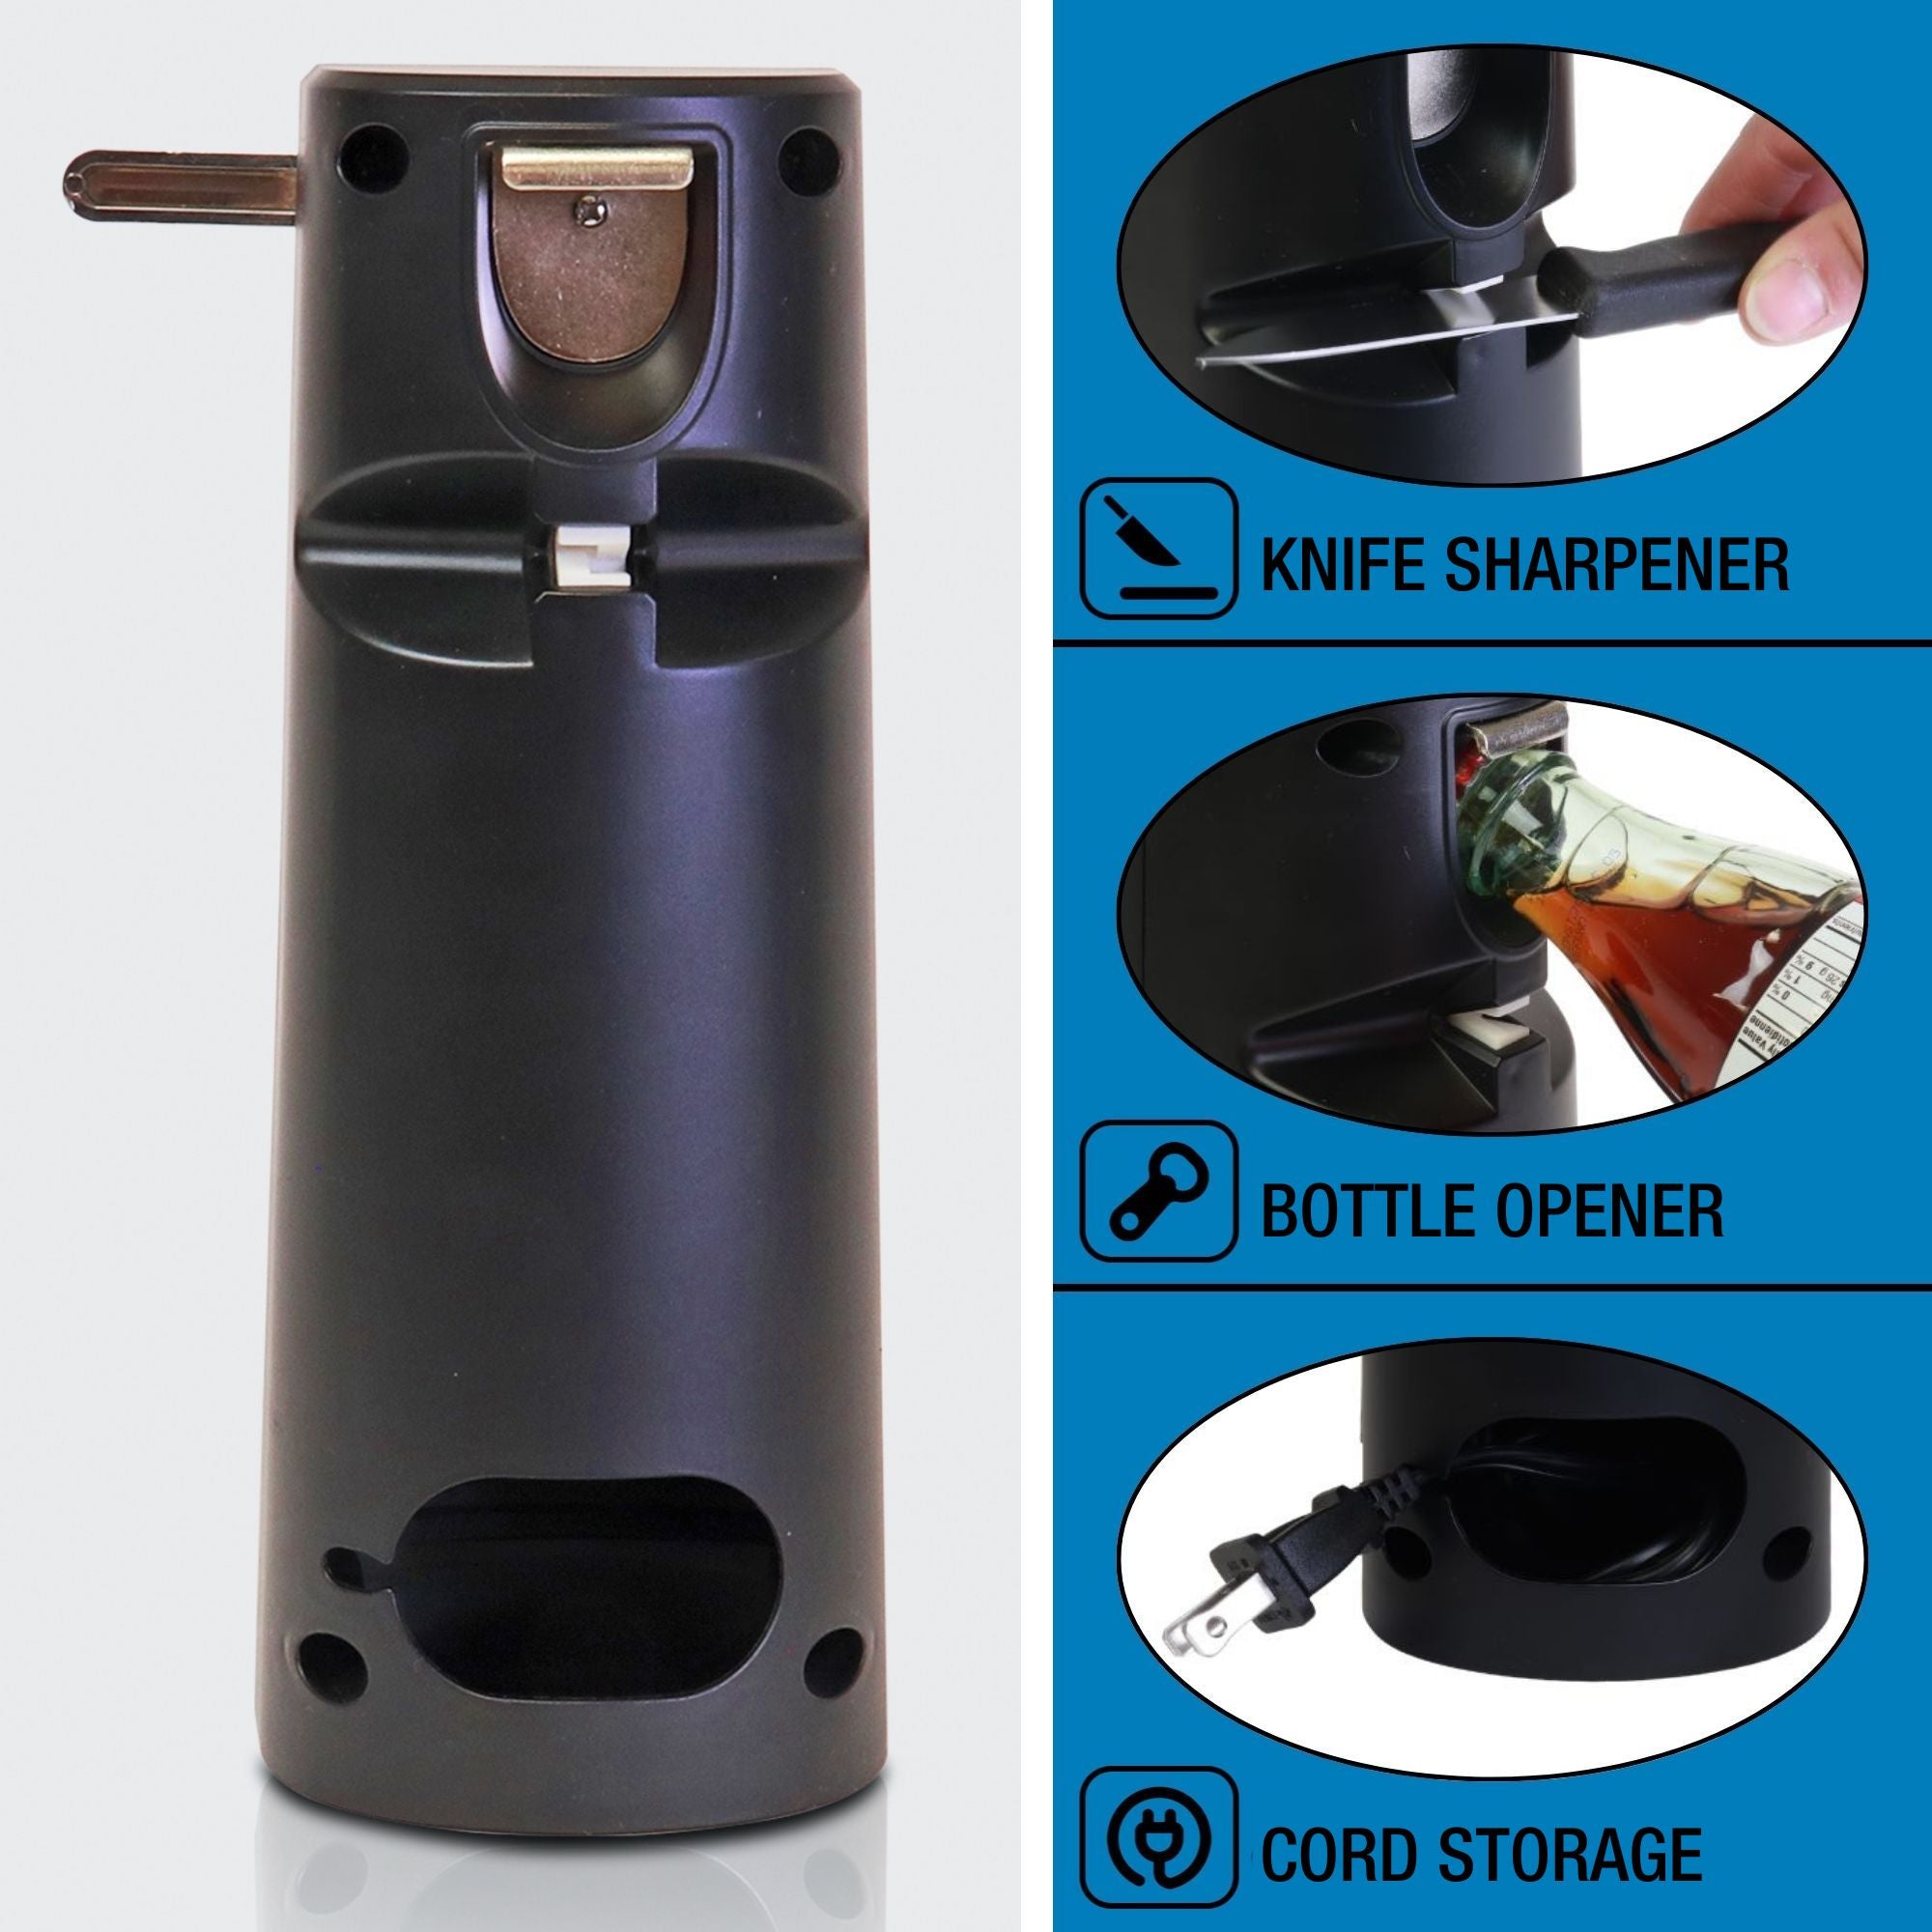 Back view of the Kenmore 3-in-1 can opener on a white background with inset closeup images of features to the right, labeled: Knife Sharpener; Bottle Opener; Cord Storage